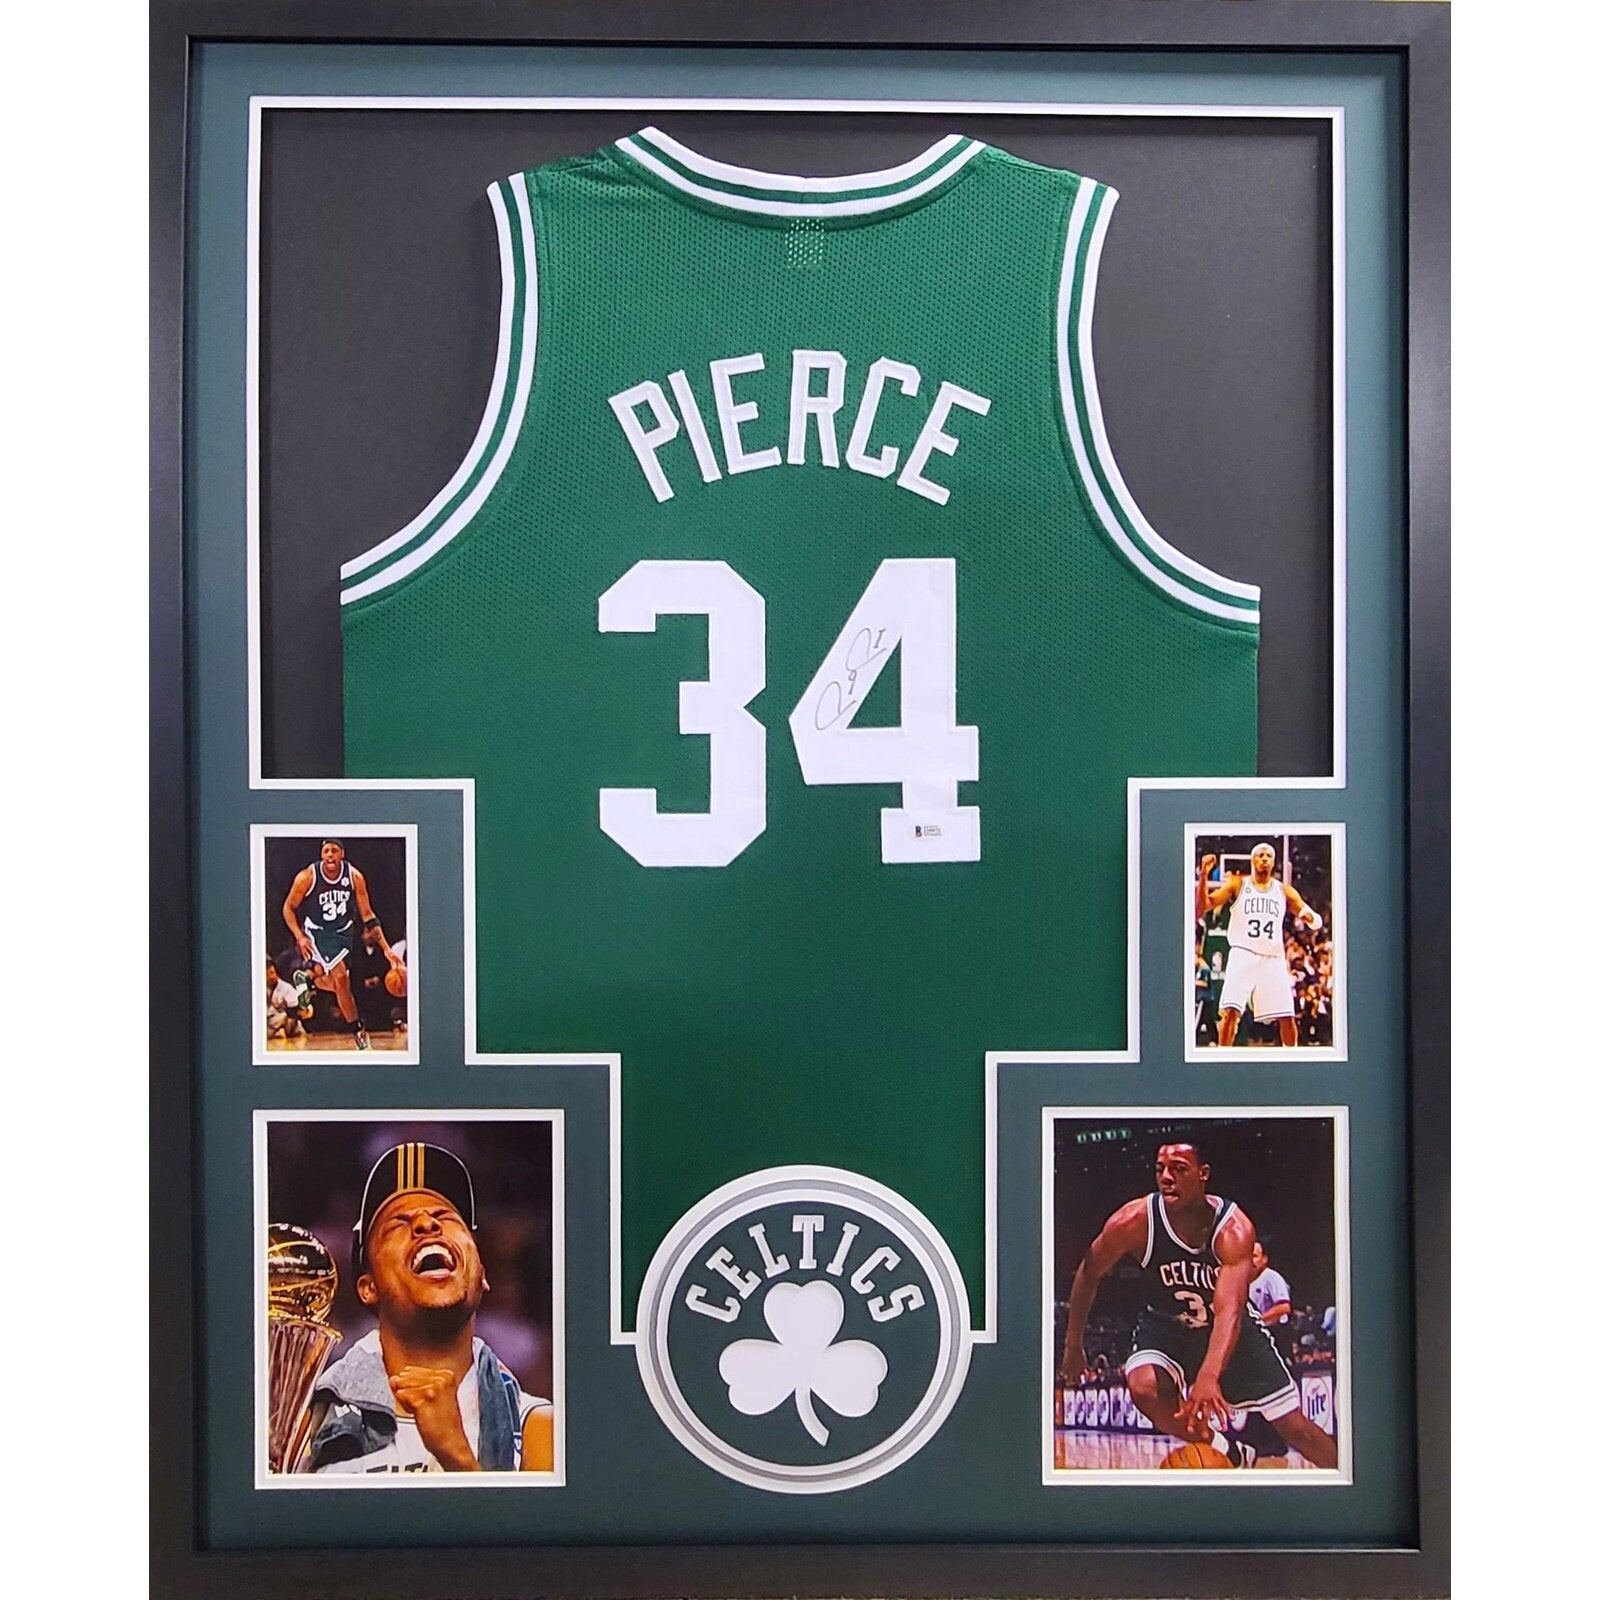 Best Boston Celtics gifts: Jerseys, hats and more